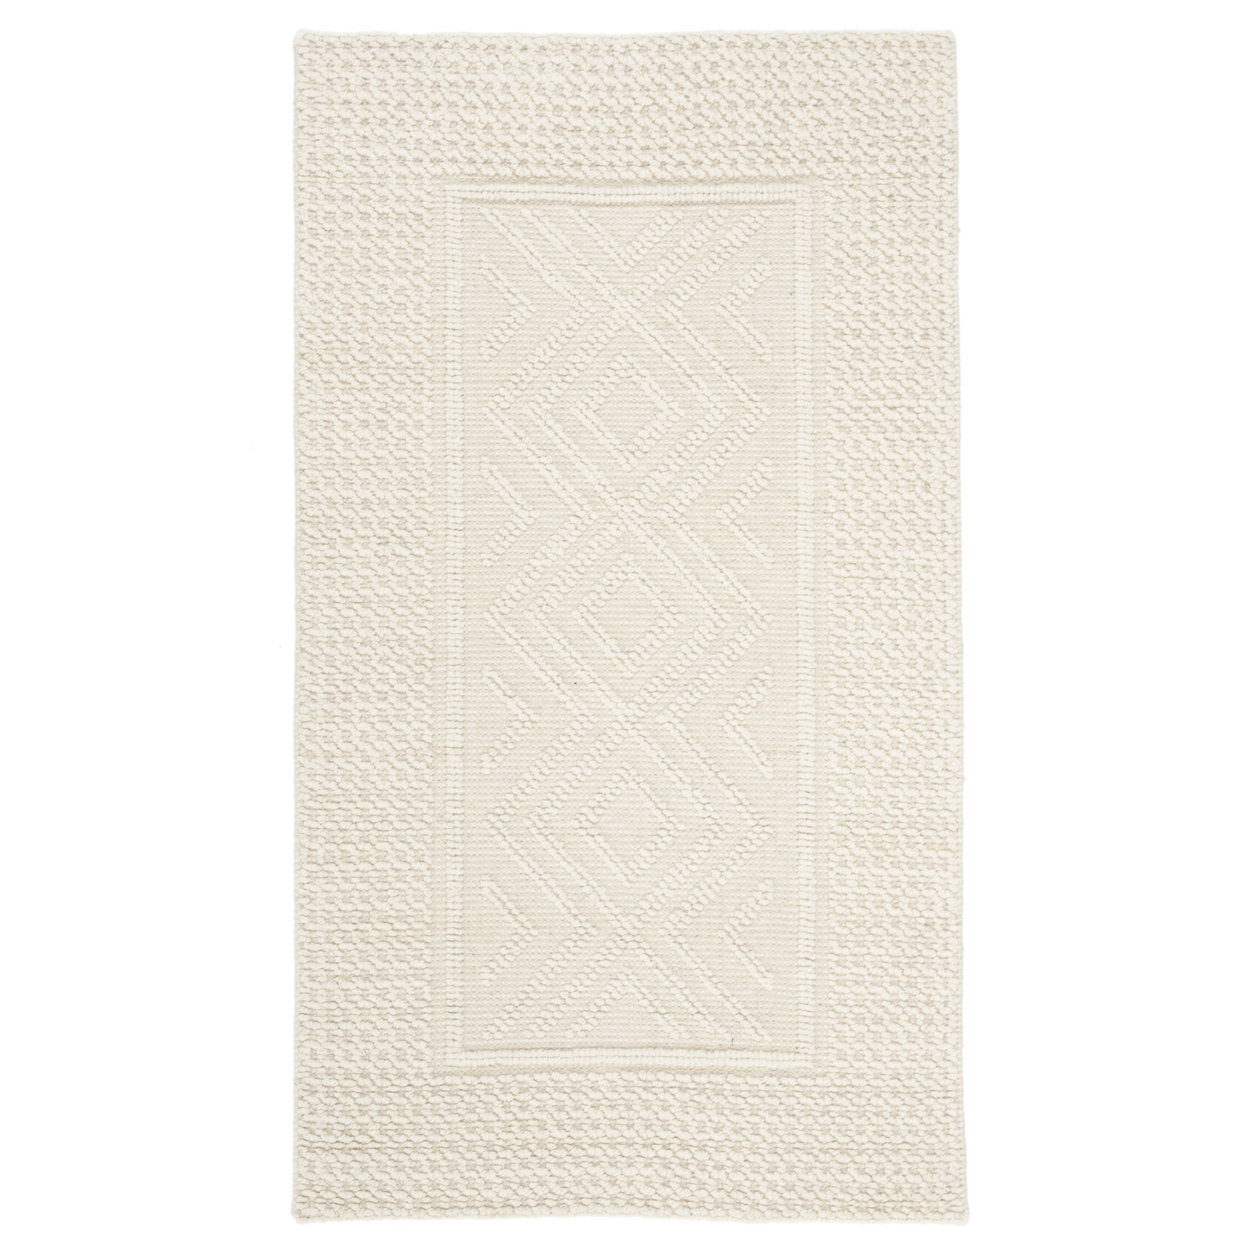 SAFAVIEH Vermont Collection VRM212A Handwoven Ivory Rug - 3 X 5